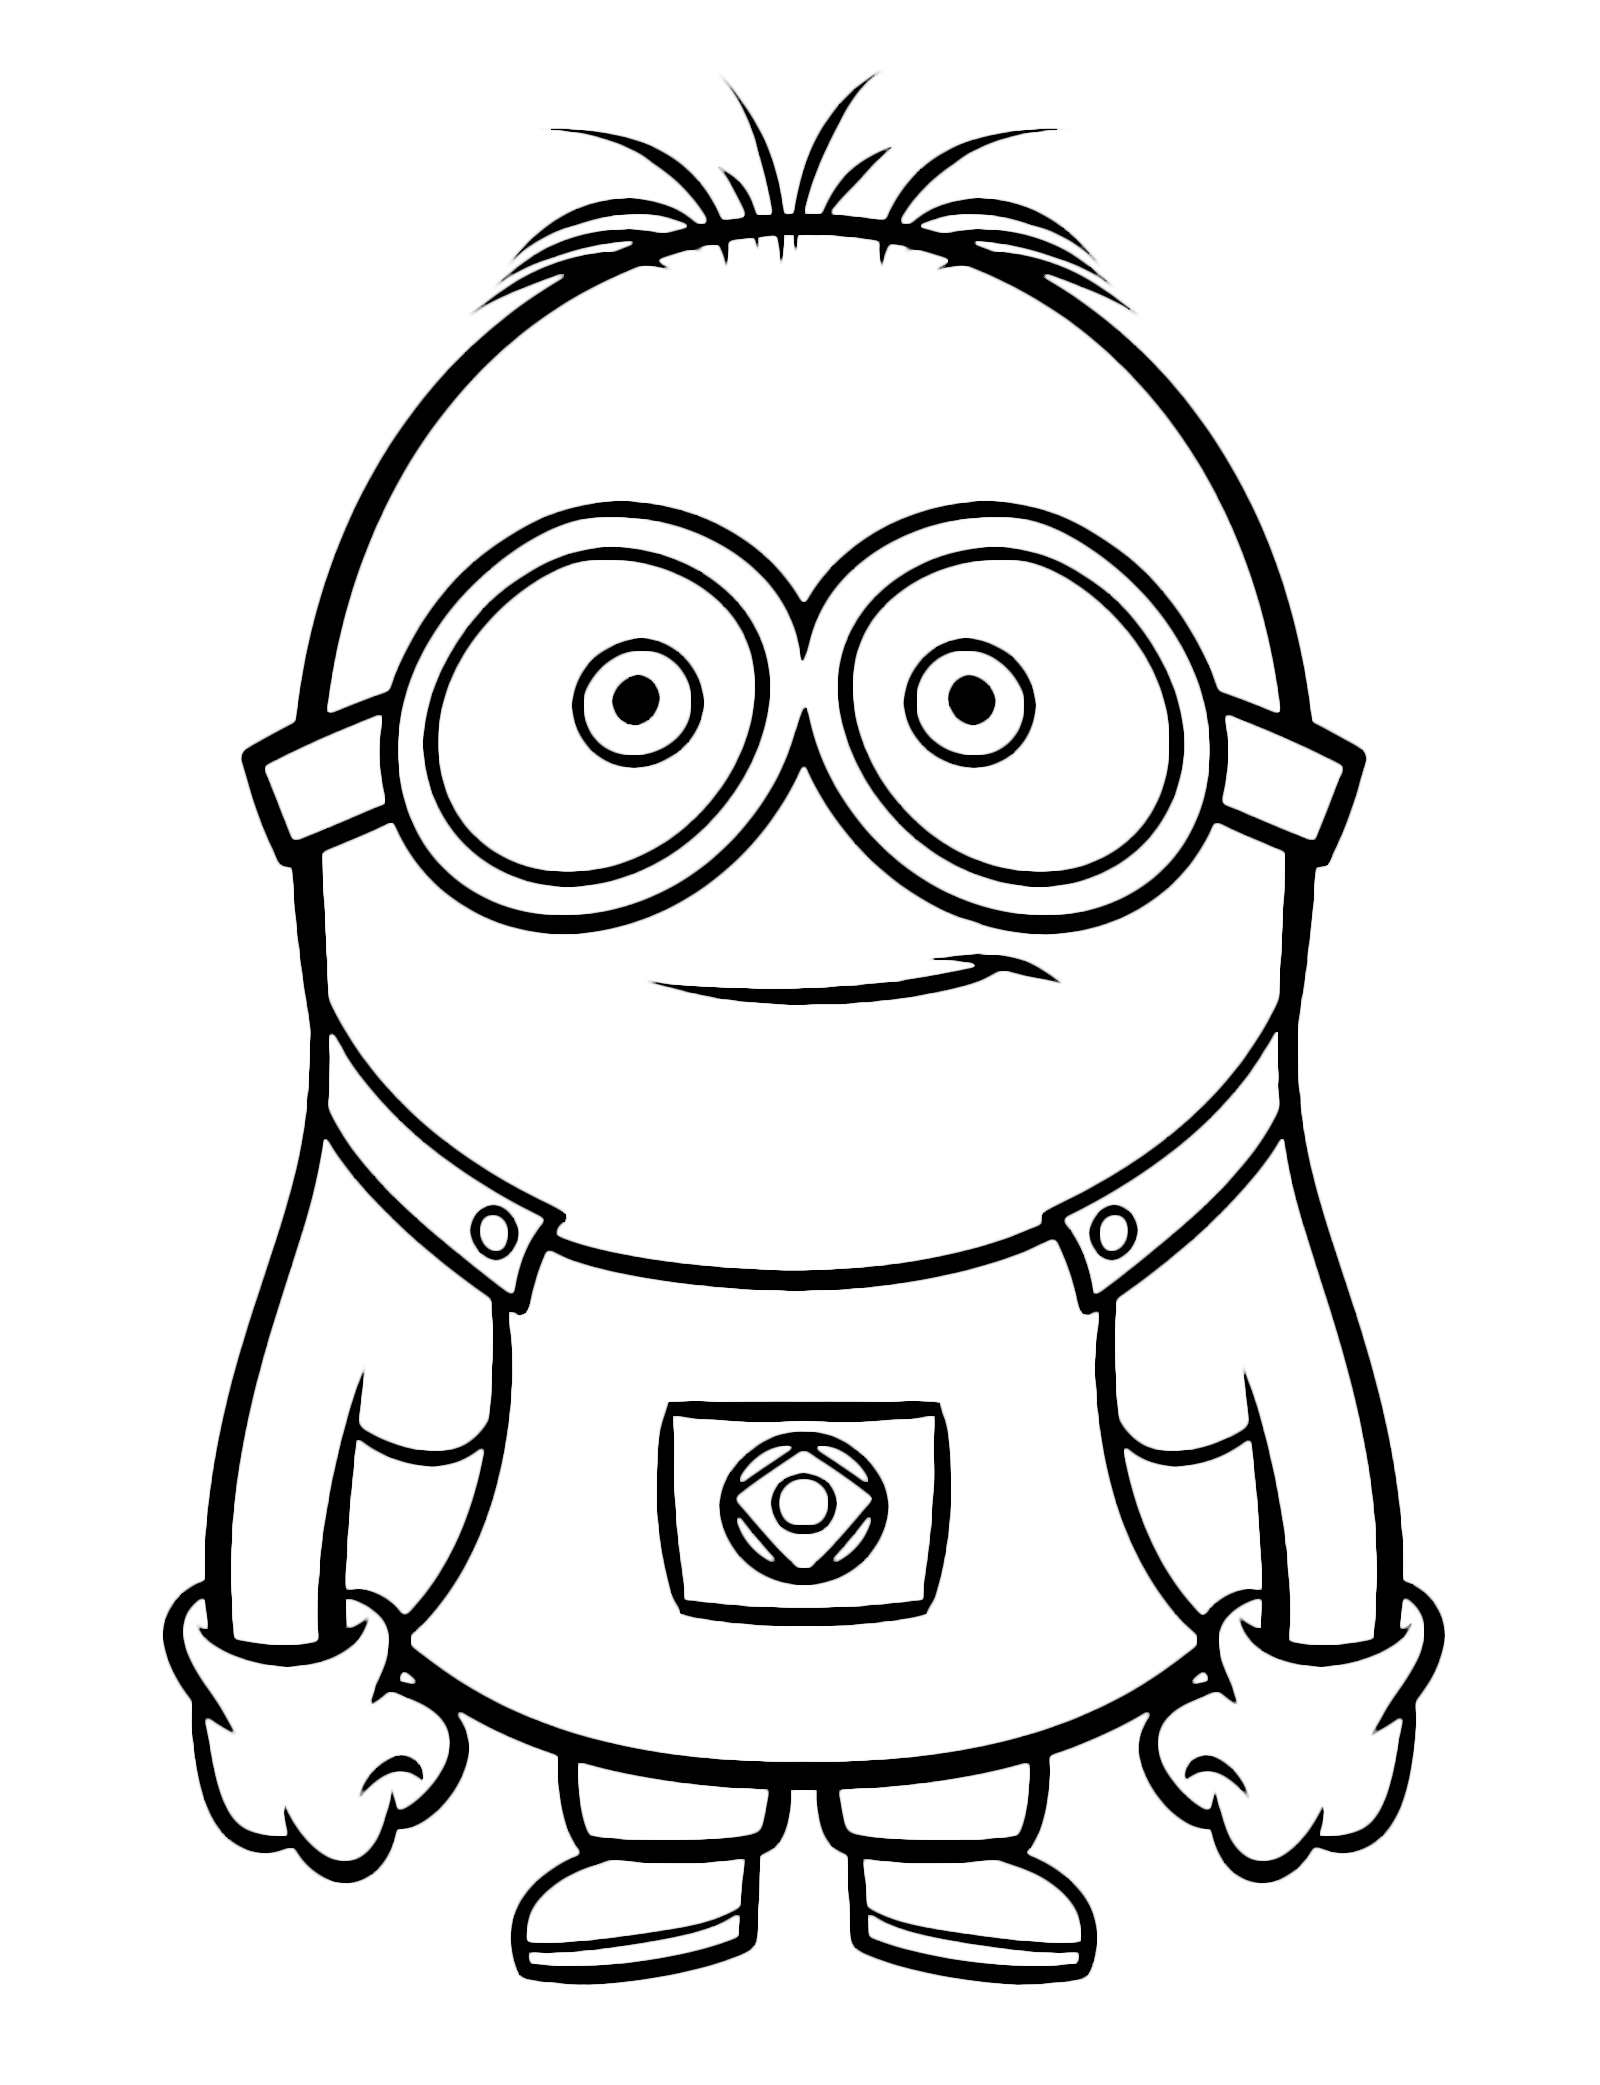 Despicable Me - Minions Dave has two eyes